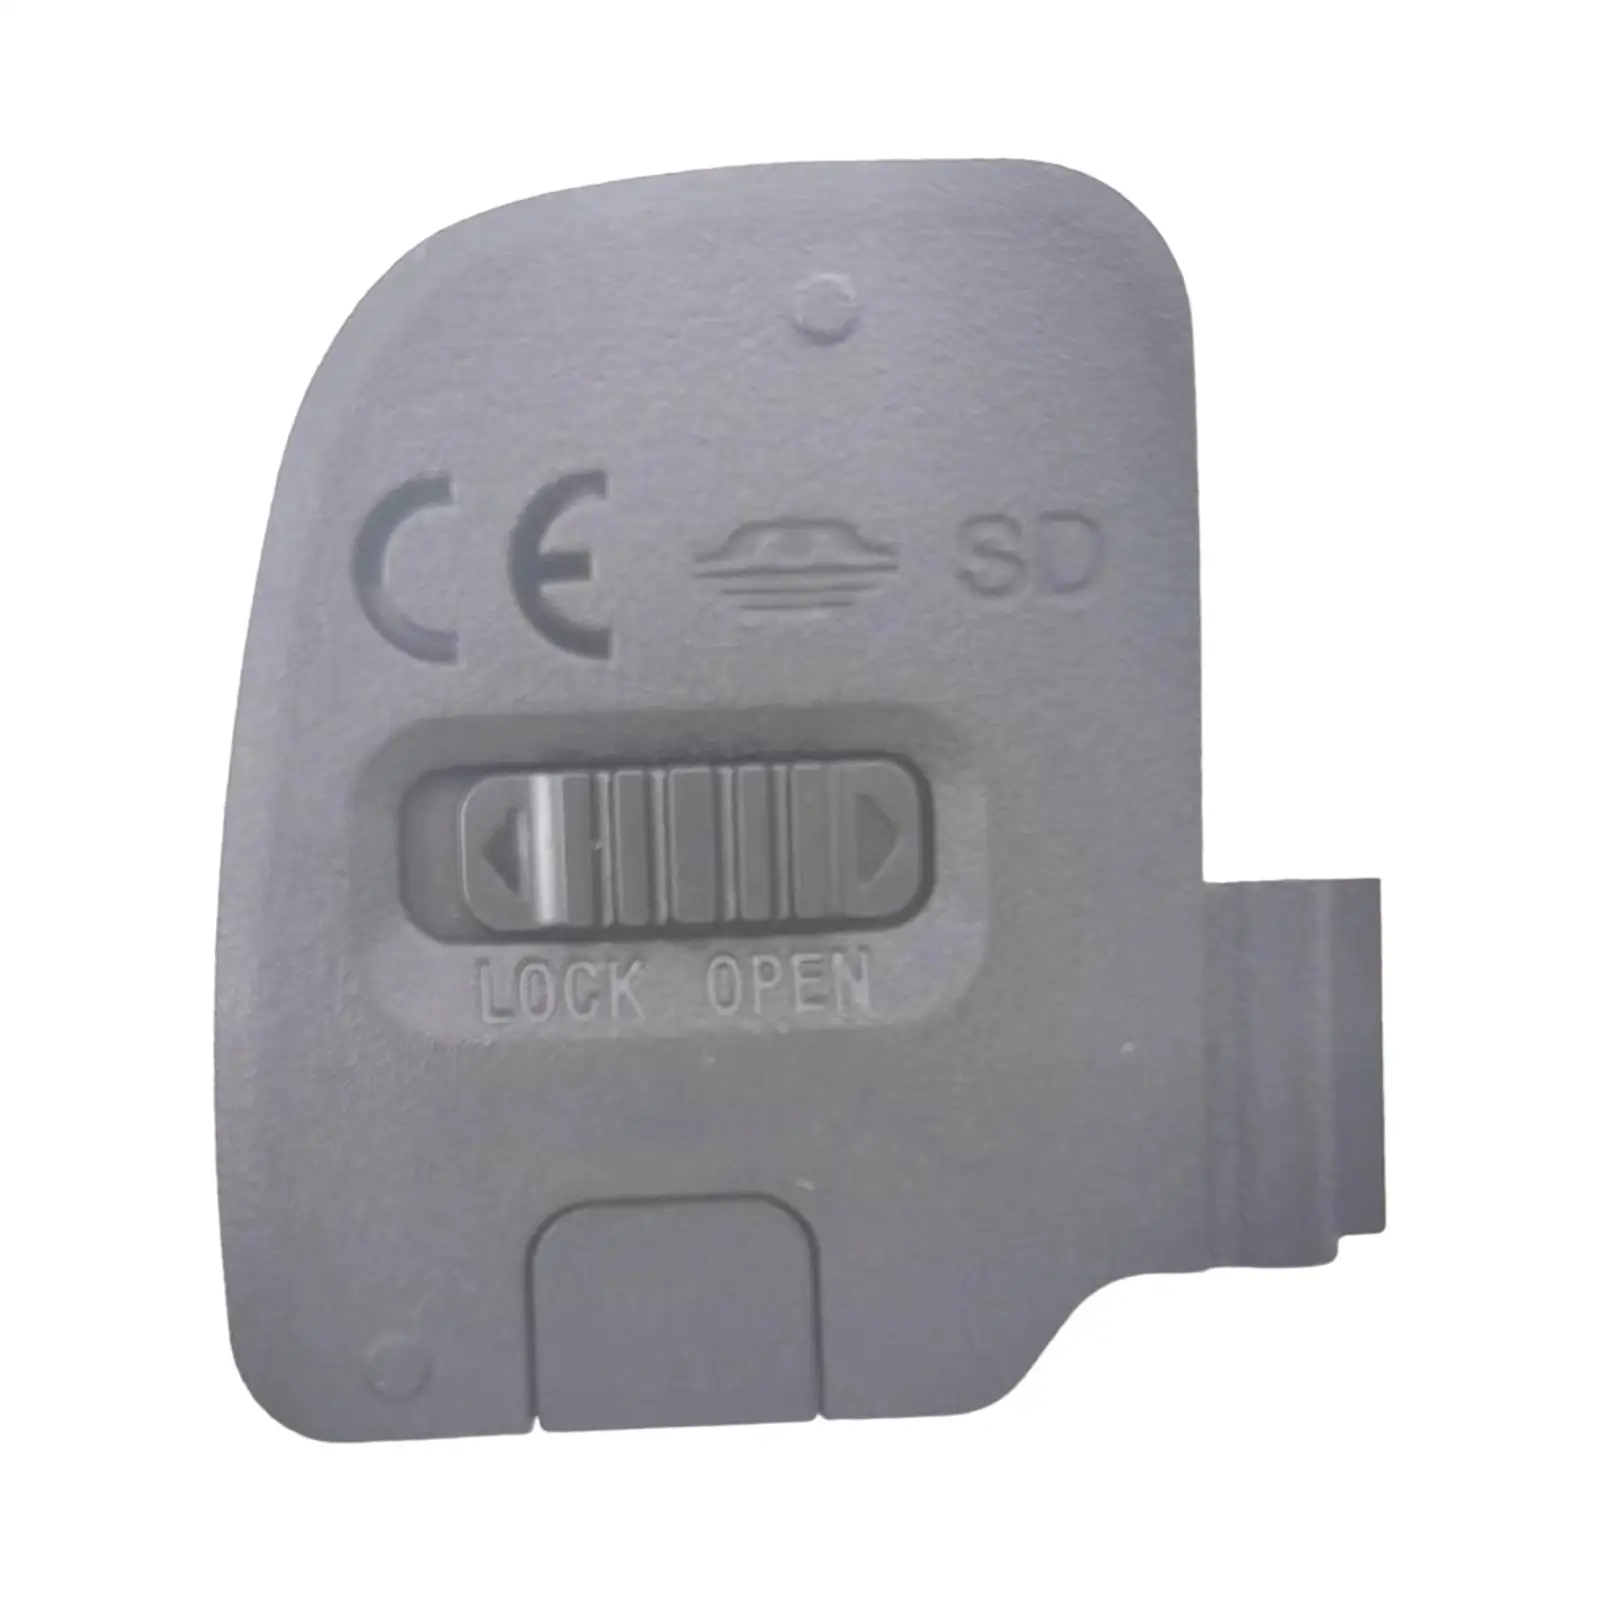 Battery Door Cover Batteries Cap Lid for A6000 Assembly Replacement Spare Parts Accessories